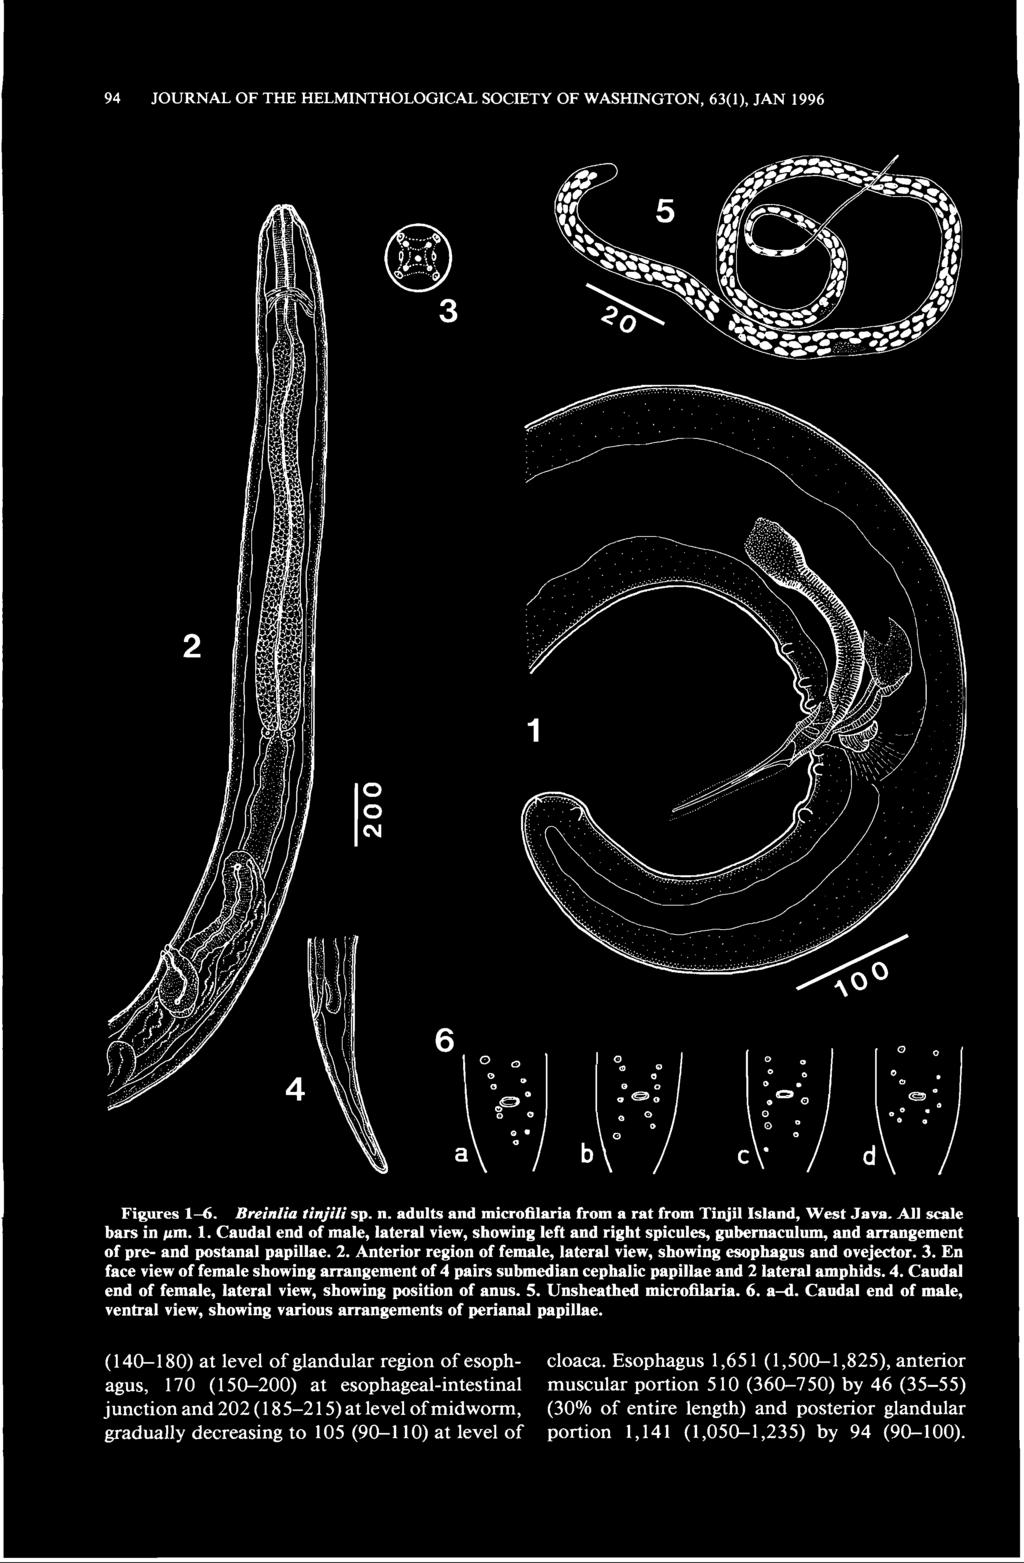 94 JOURNAL OF THE HELMINTHOLOGICAL SOCIETY OF WASHINGTON, 3(1), JAN 199 Figures 1. Breinlia tin/ill sp. n. adults and microfilaria from a rat from Tinjil Island, West Java. All scale bars in pm. 1. Caudal end of male, lateral view, showing left and right spicules, gubernaculum, and arrangement of pre- and postanal papillae.